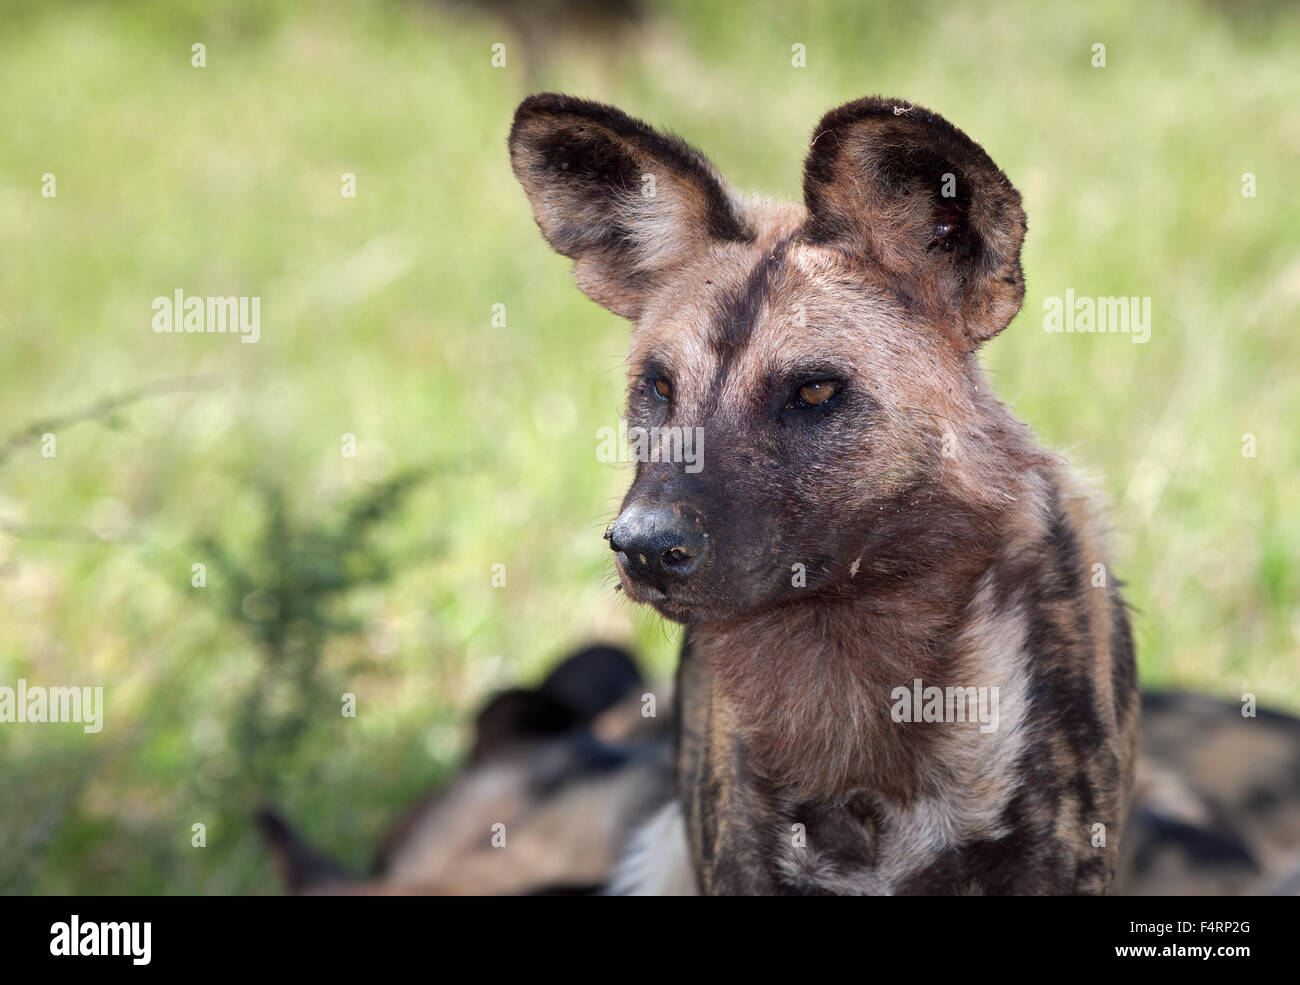 African wild dog or African painted dog (Lycaon pictus), portrait, Kruger National Park, South Africa Stock Photo